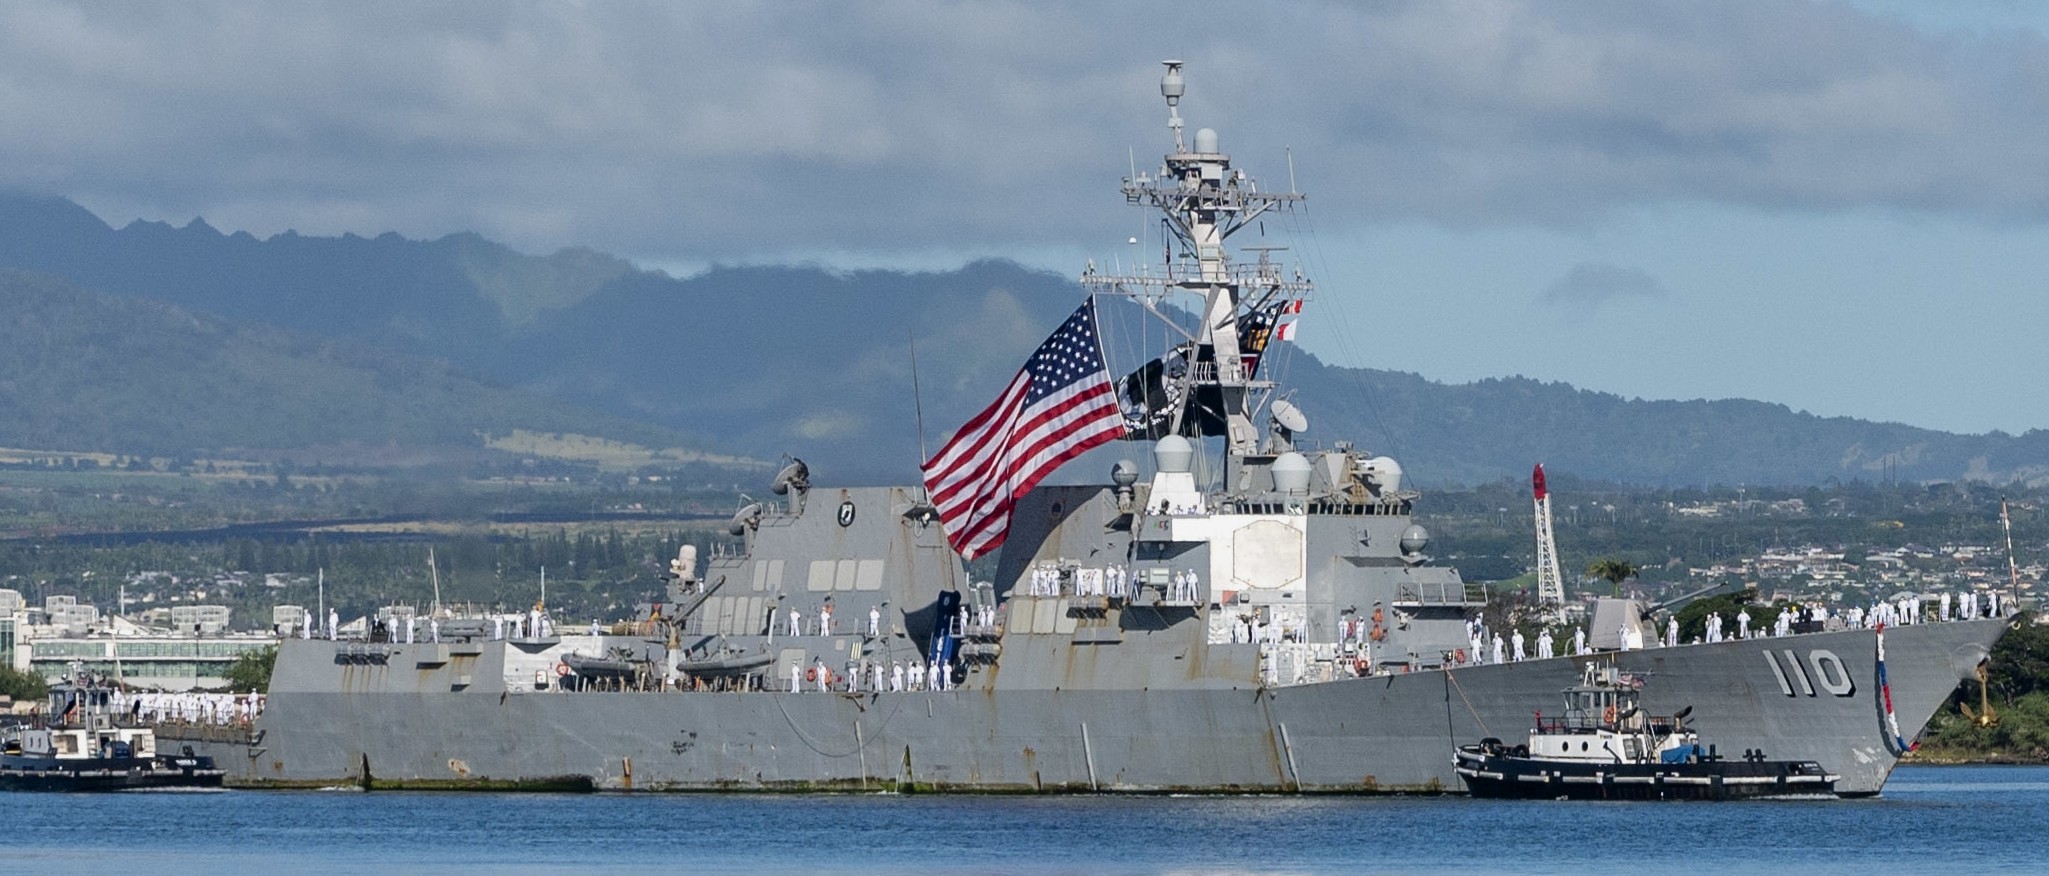 ddg-110 uss william p. lawrence arleigh burke class guided missile destroyer aegis us navy joint base pearl harbor hickam hawaii 76